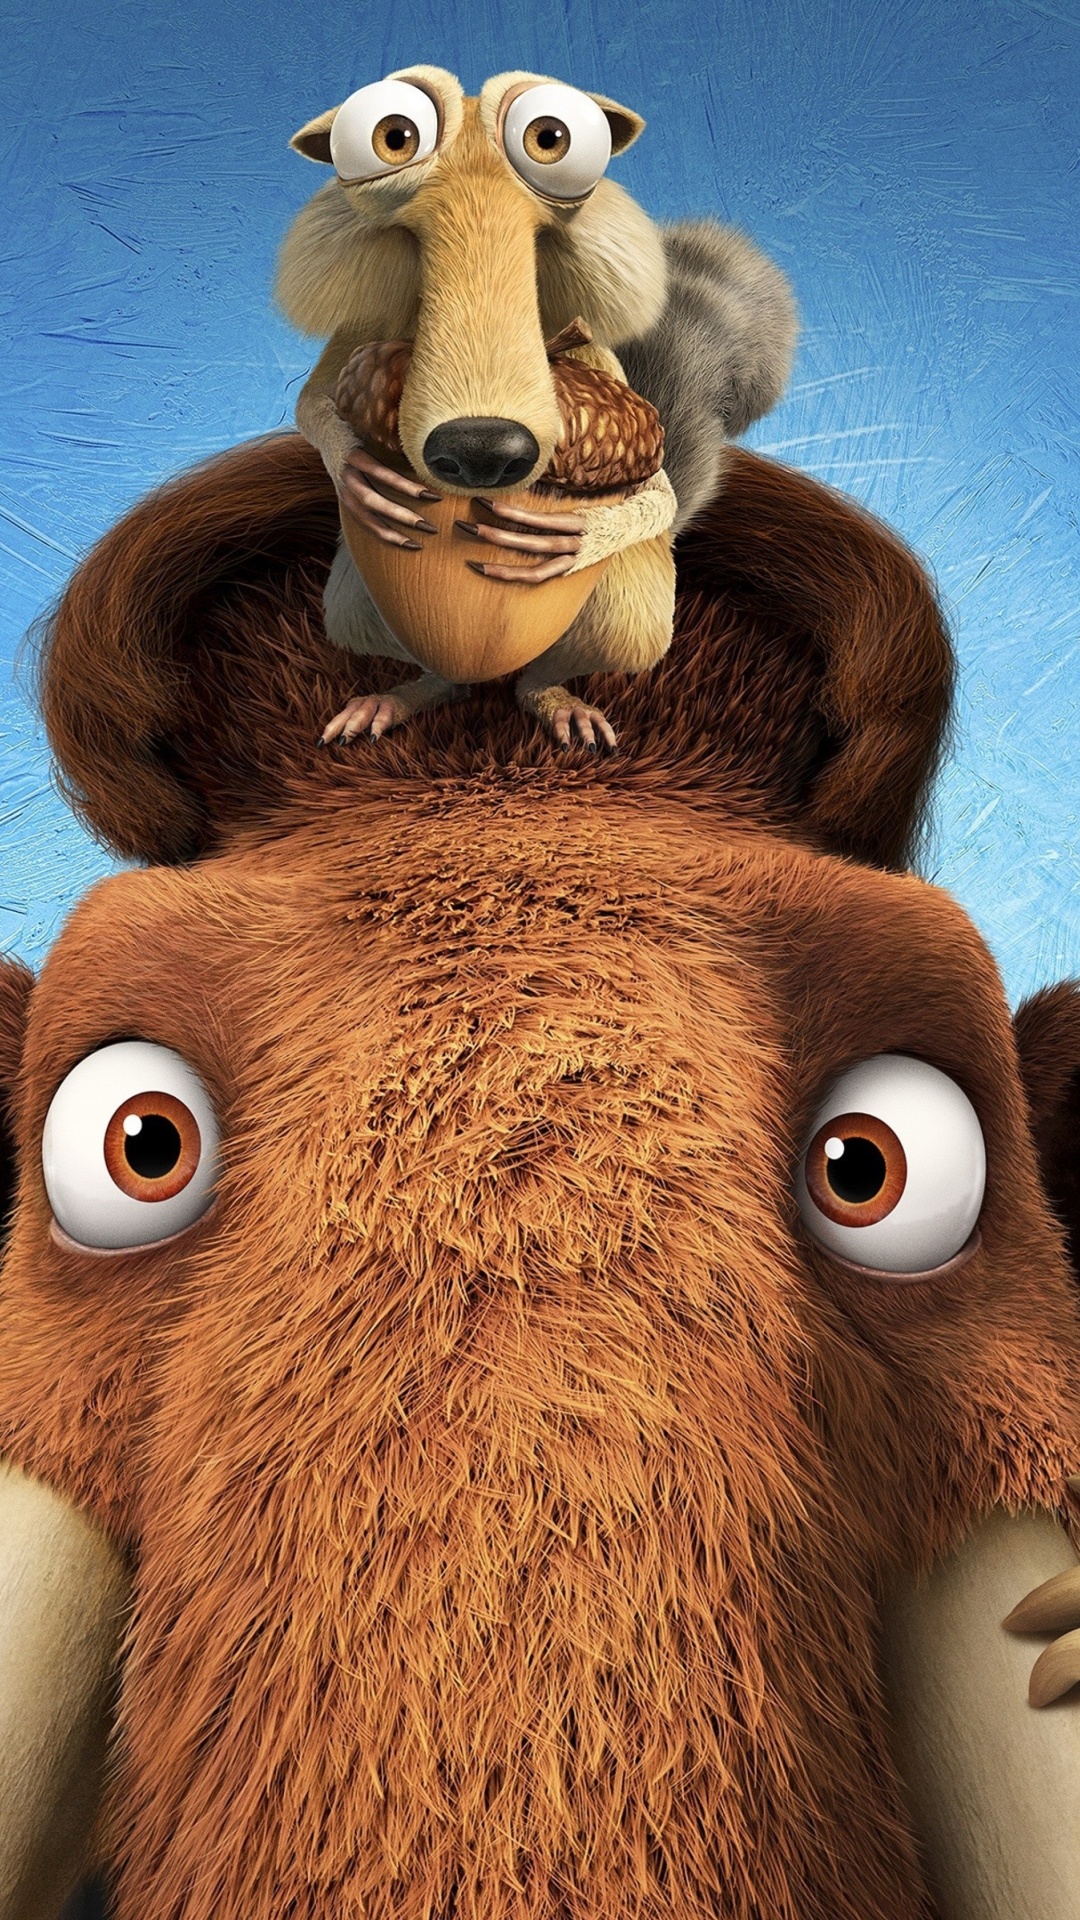 Ice Age 5 Collision Course with Diego, Manny, Scrat, Sid, Mammoths screenshot #1 1080x1920